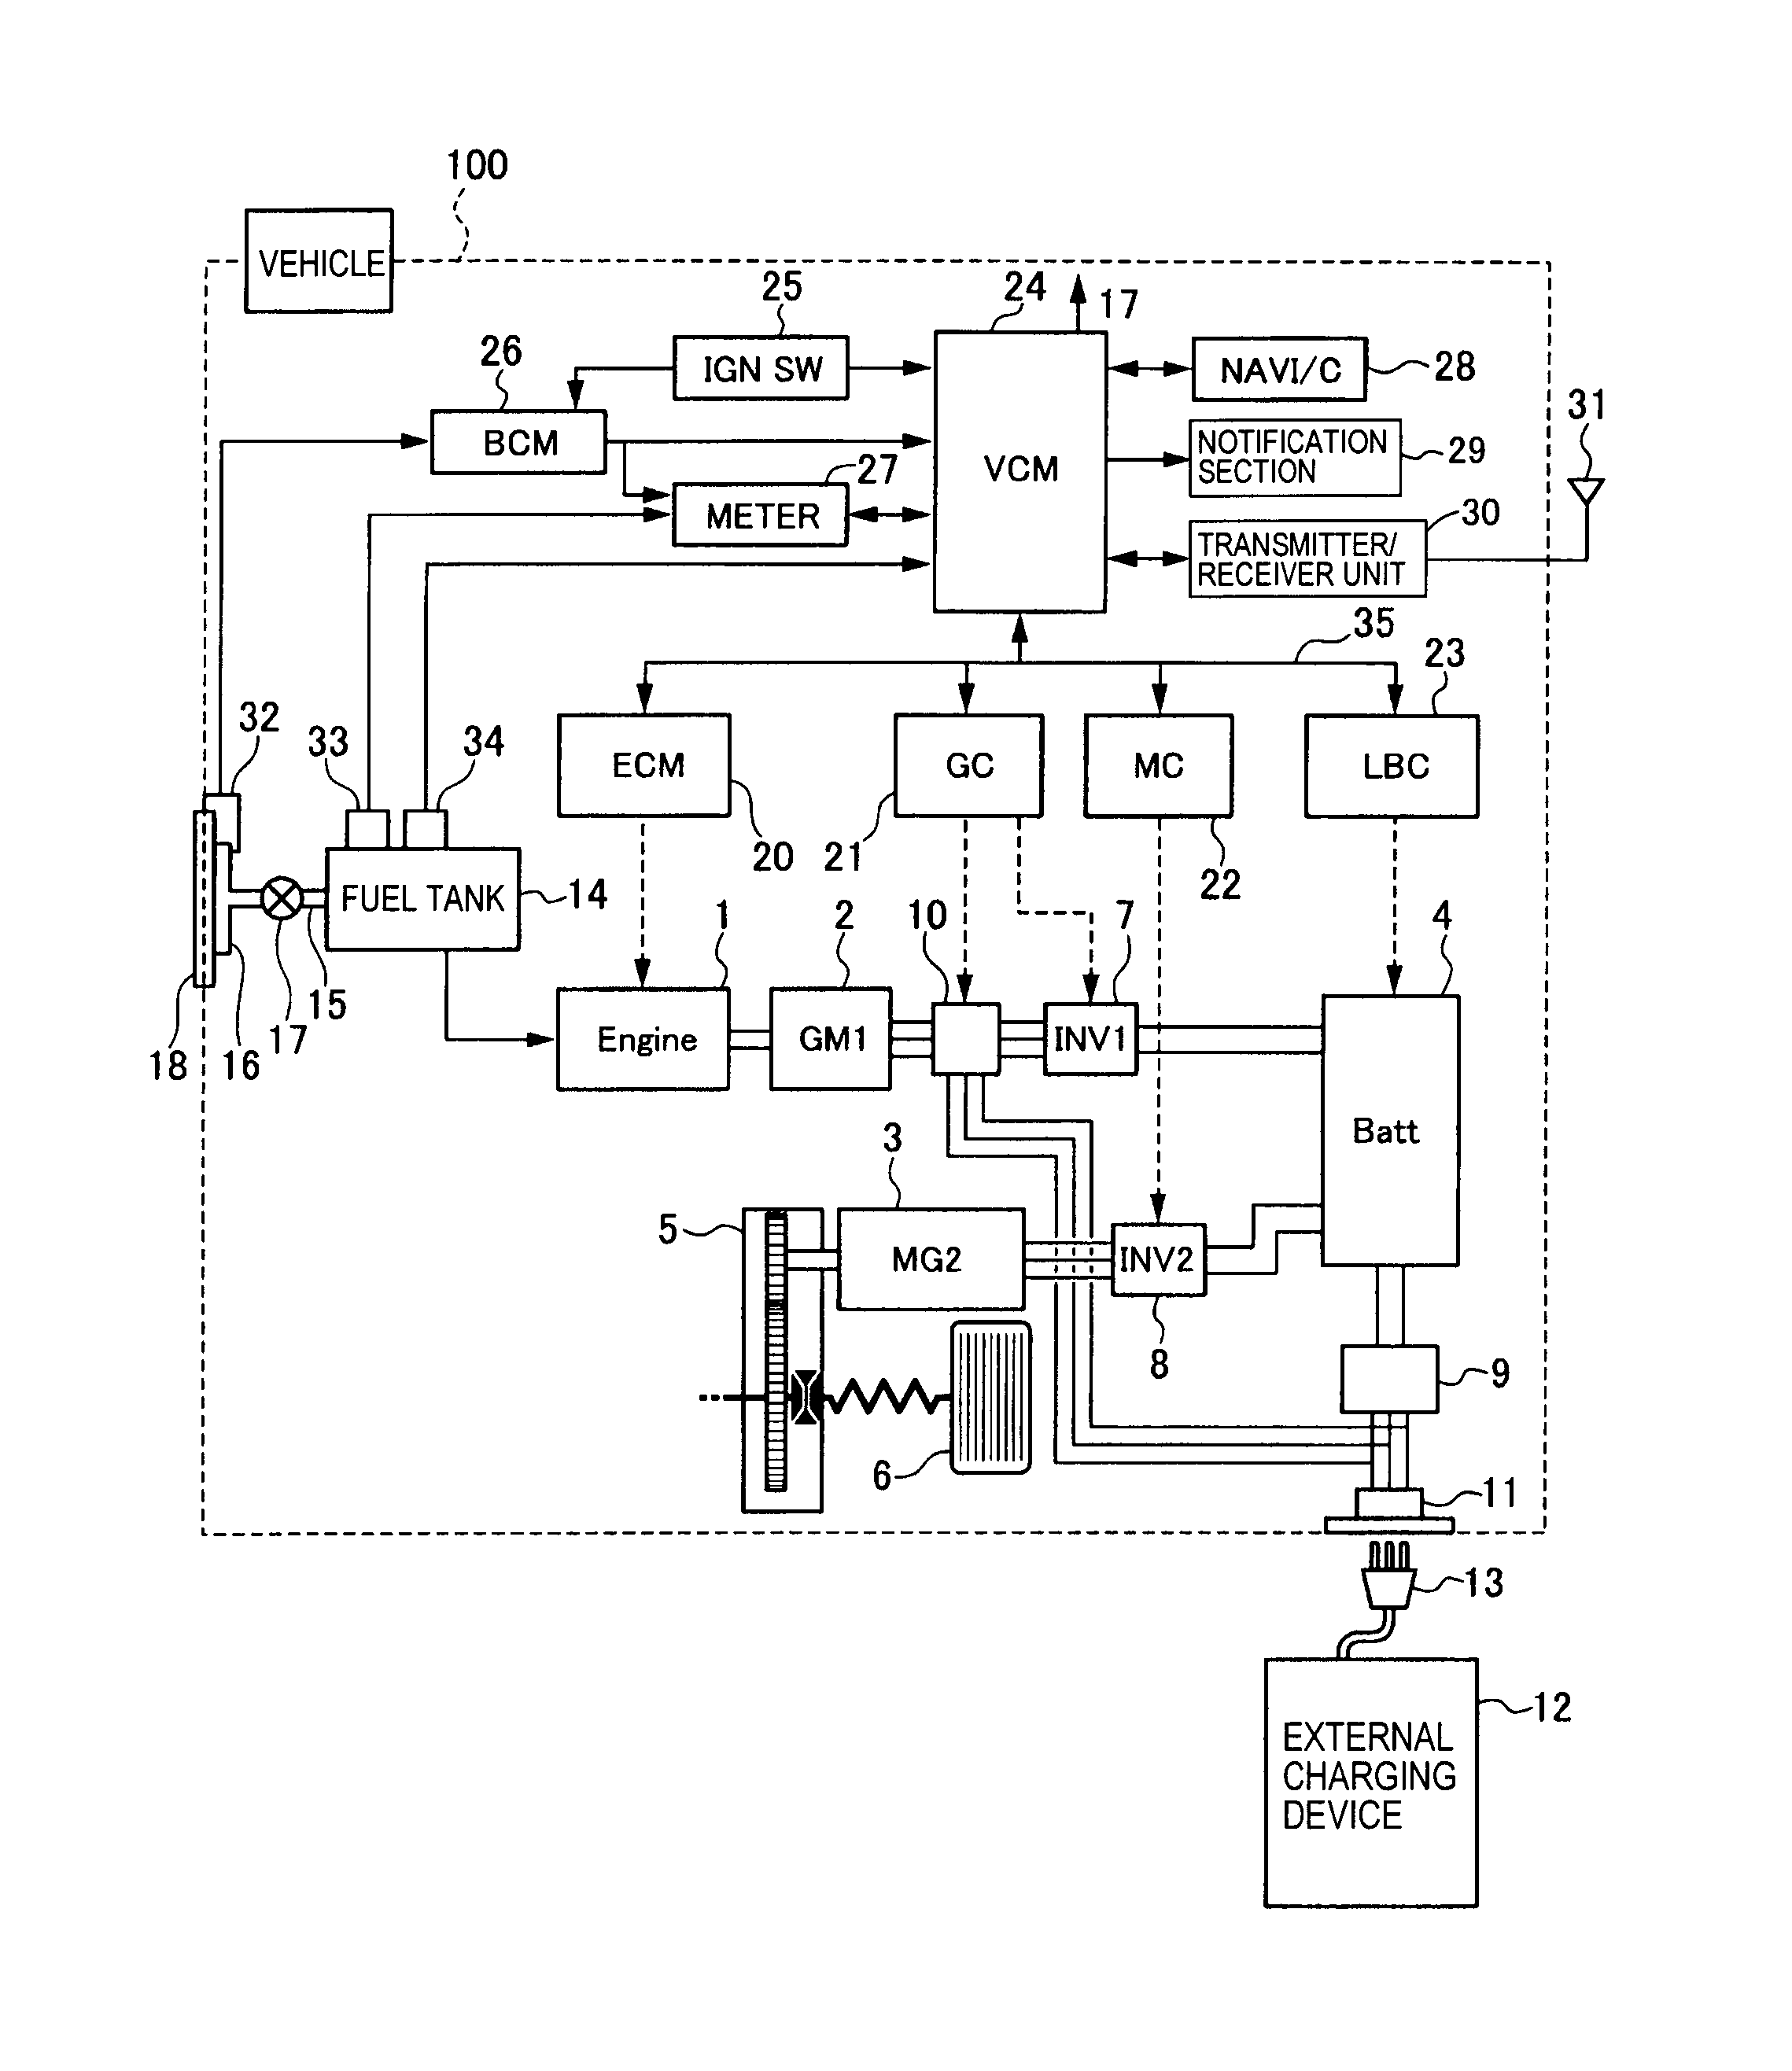 hunter fan wiring diagram with remote 23413